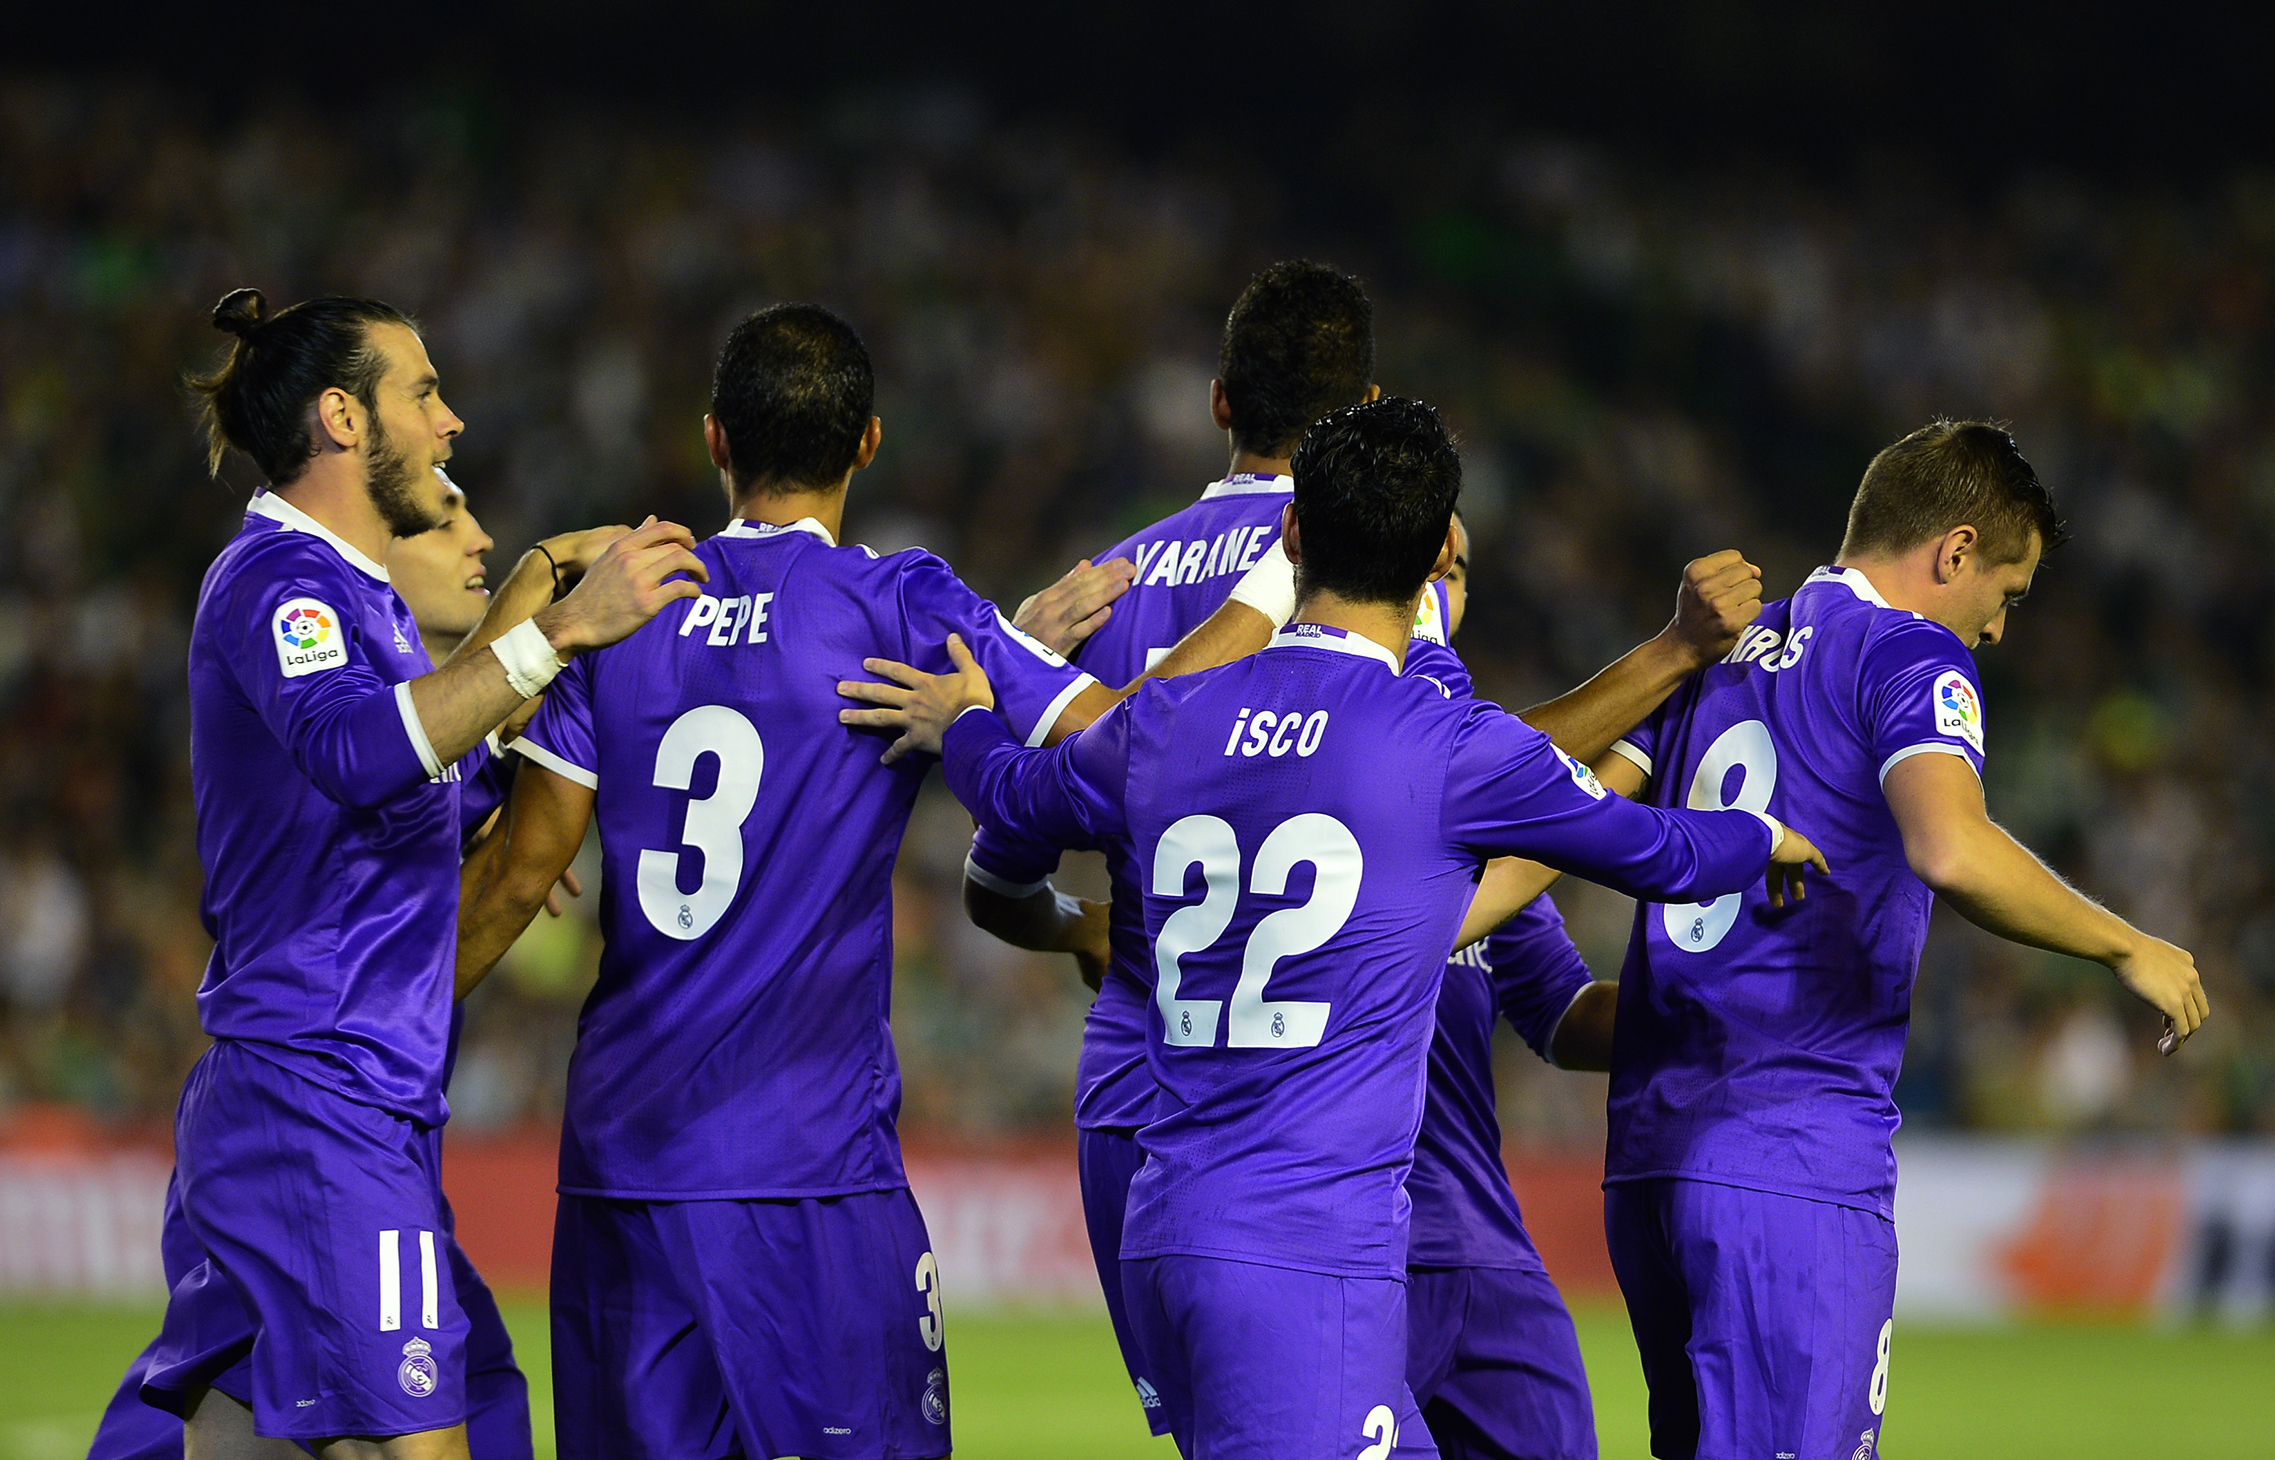 Real Madrid players celebrate their opener during the Spanish league football match Real Betis vs Real Madrid CF at the Benito Villamarin stadium in Sevilla on October 15, 2016. / AFP / CRISTINA QUICLER        (Photo credit should read CRISTINA QUICLER/AFP/Getty Images)